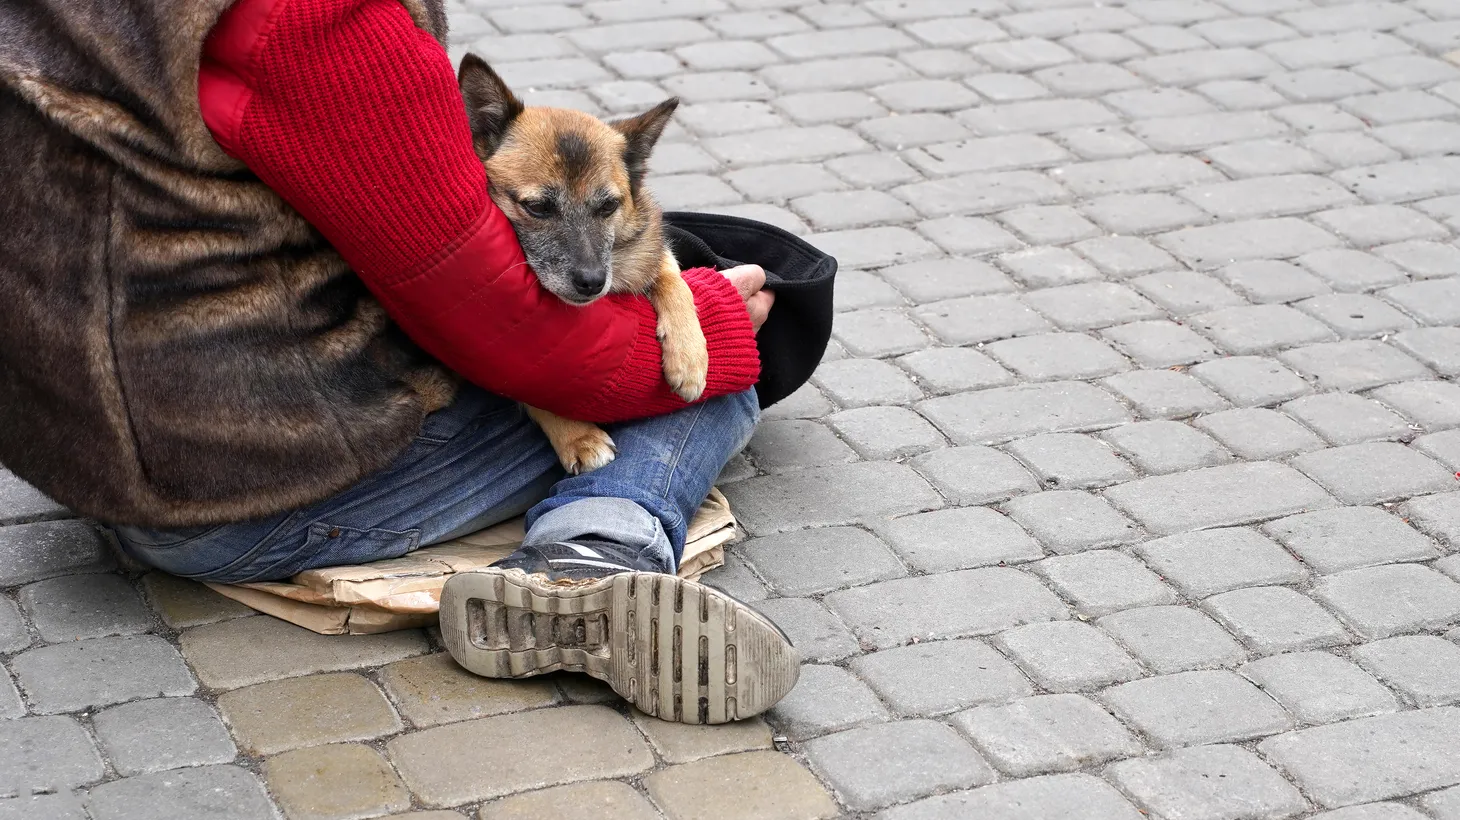 “It's actually estimated that a quarter of unhoused people, especially in this state, have pets,” says Liv Sigel, founder of Underdog Community Project.